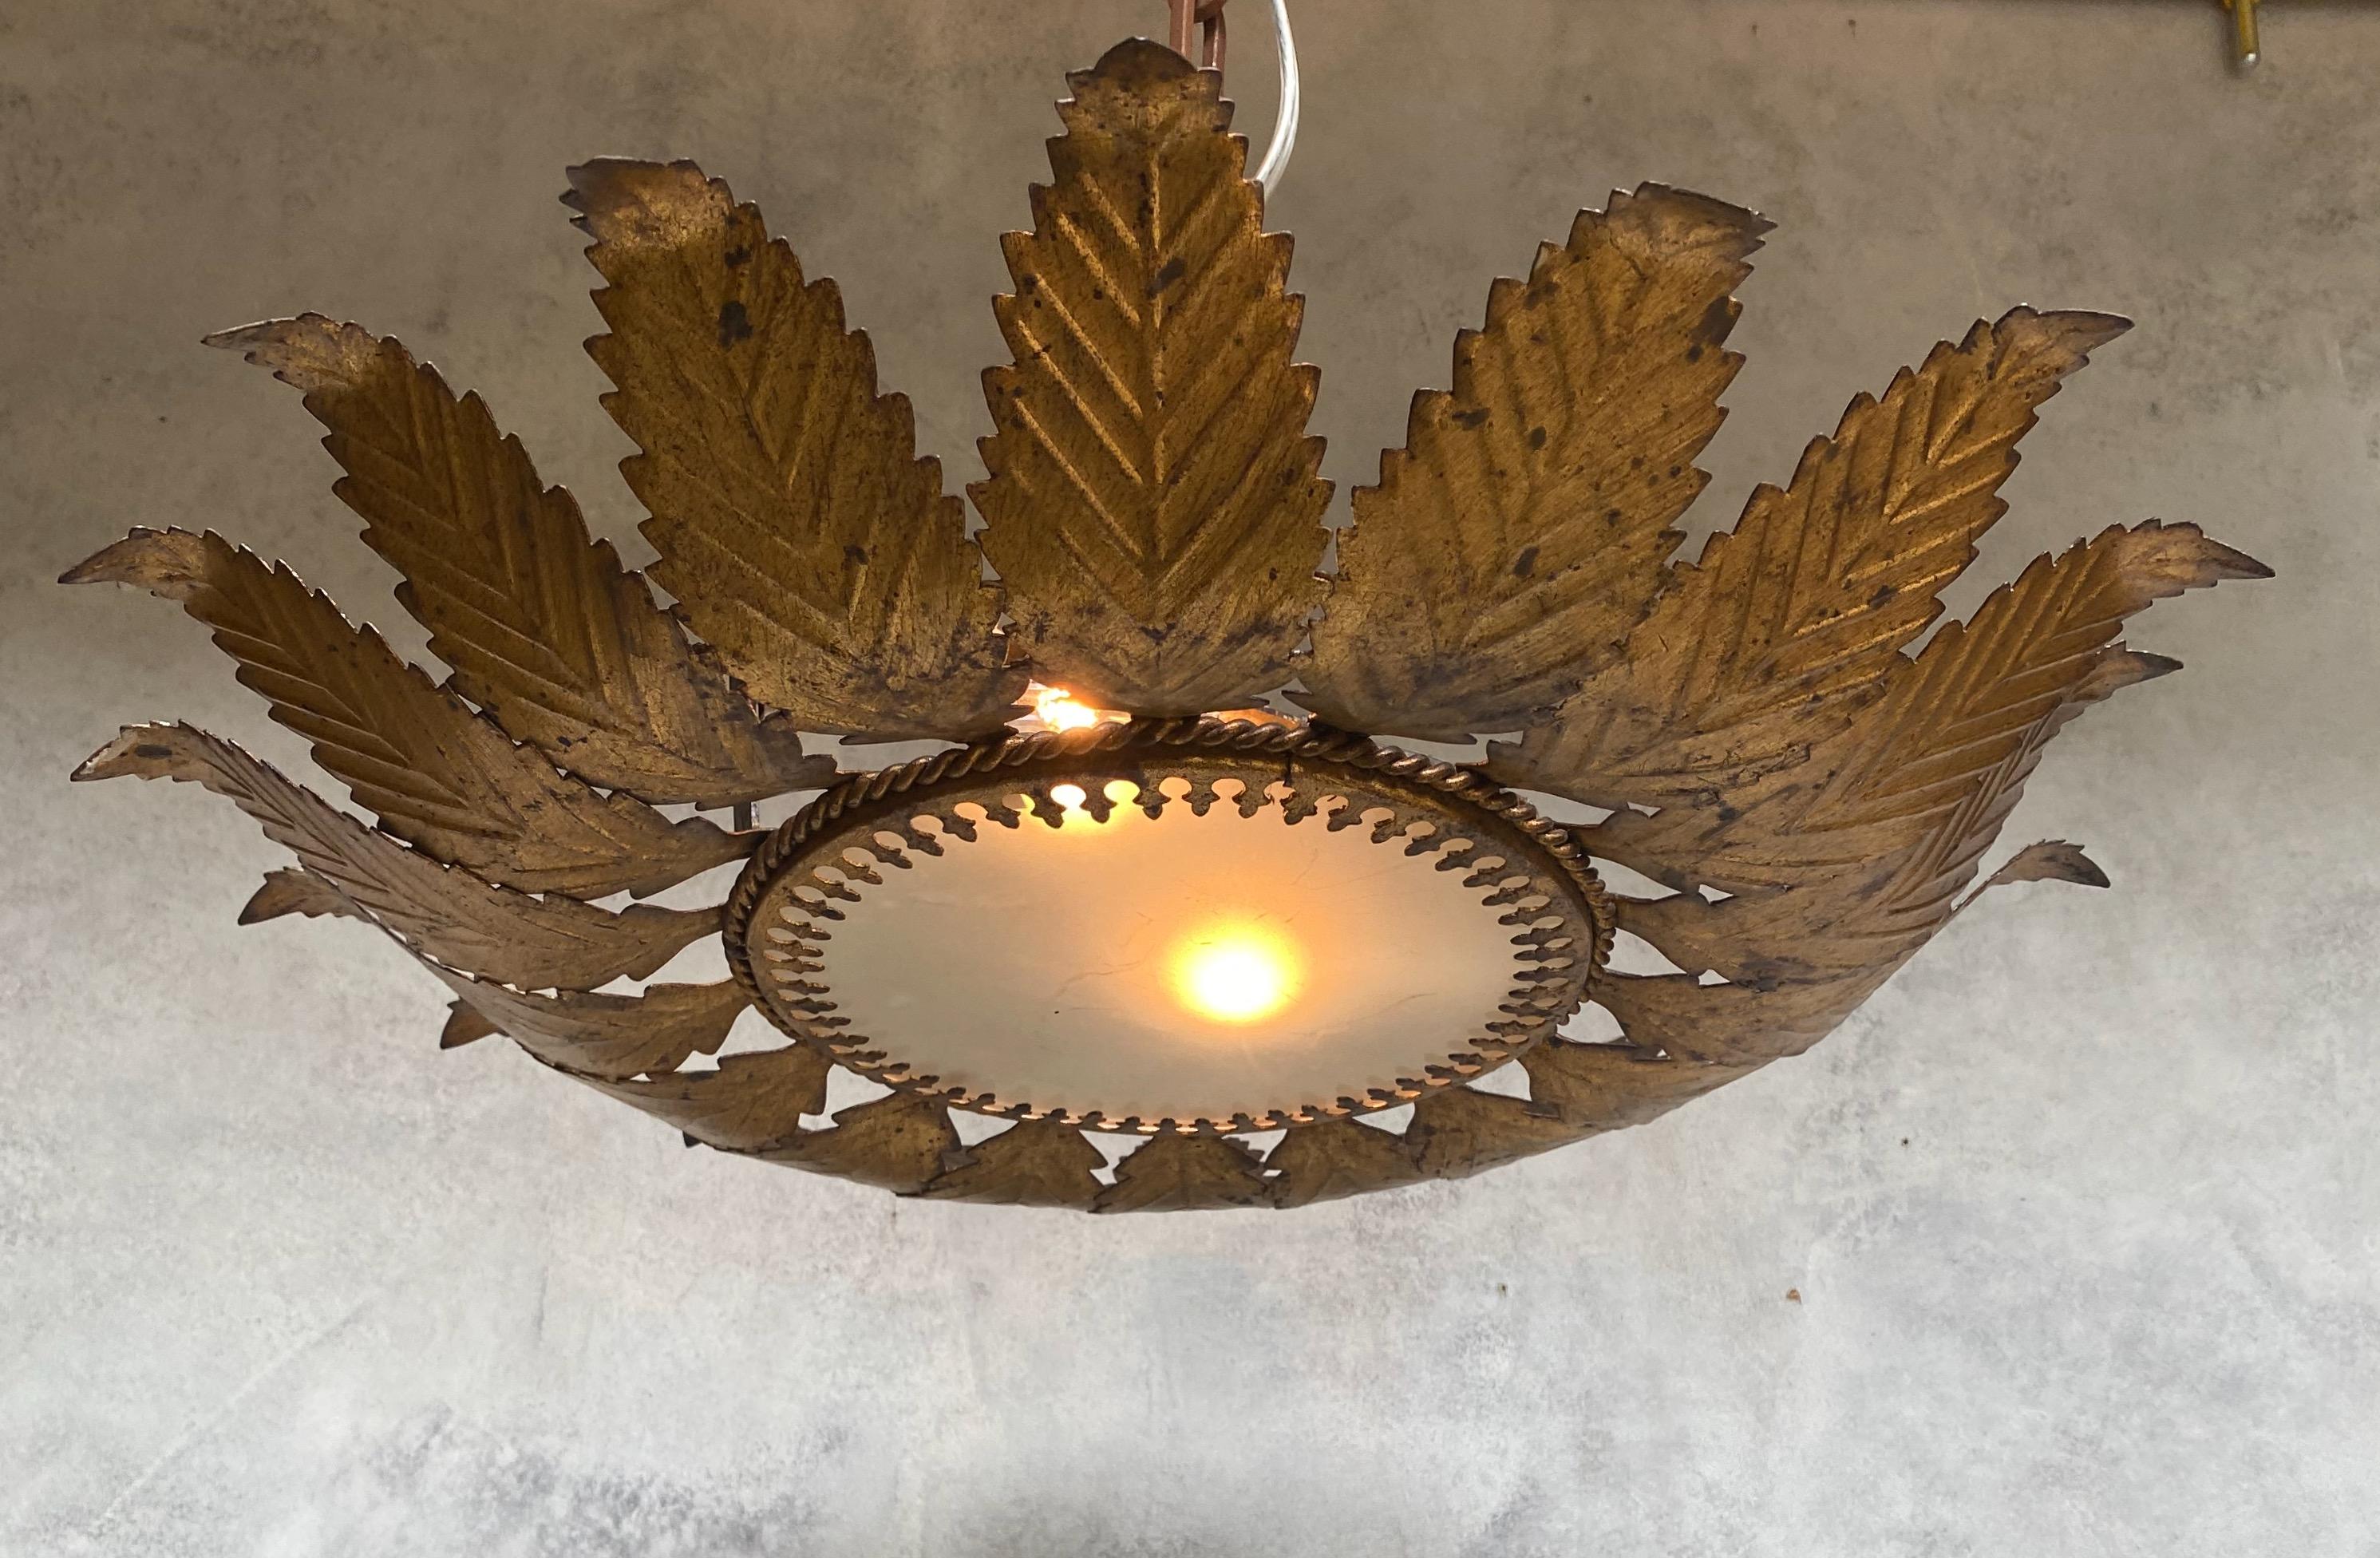 A stunning gilt metal sunburst ceiling fixture from Spain dating back to the 1950s. This flush mount ceiling fixture is composed of eighteen leaf patterned radiating rays joined at the base with a single braid and a decorative interior band that